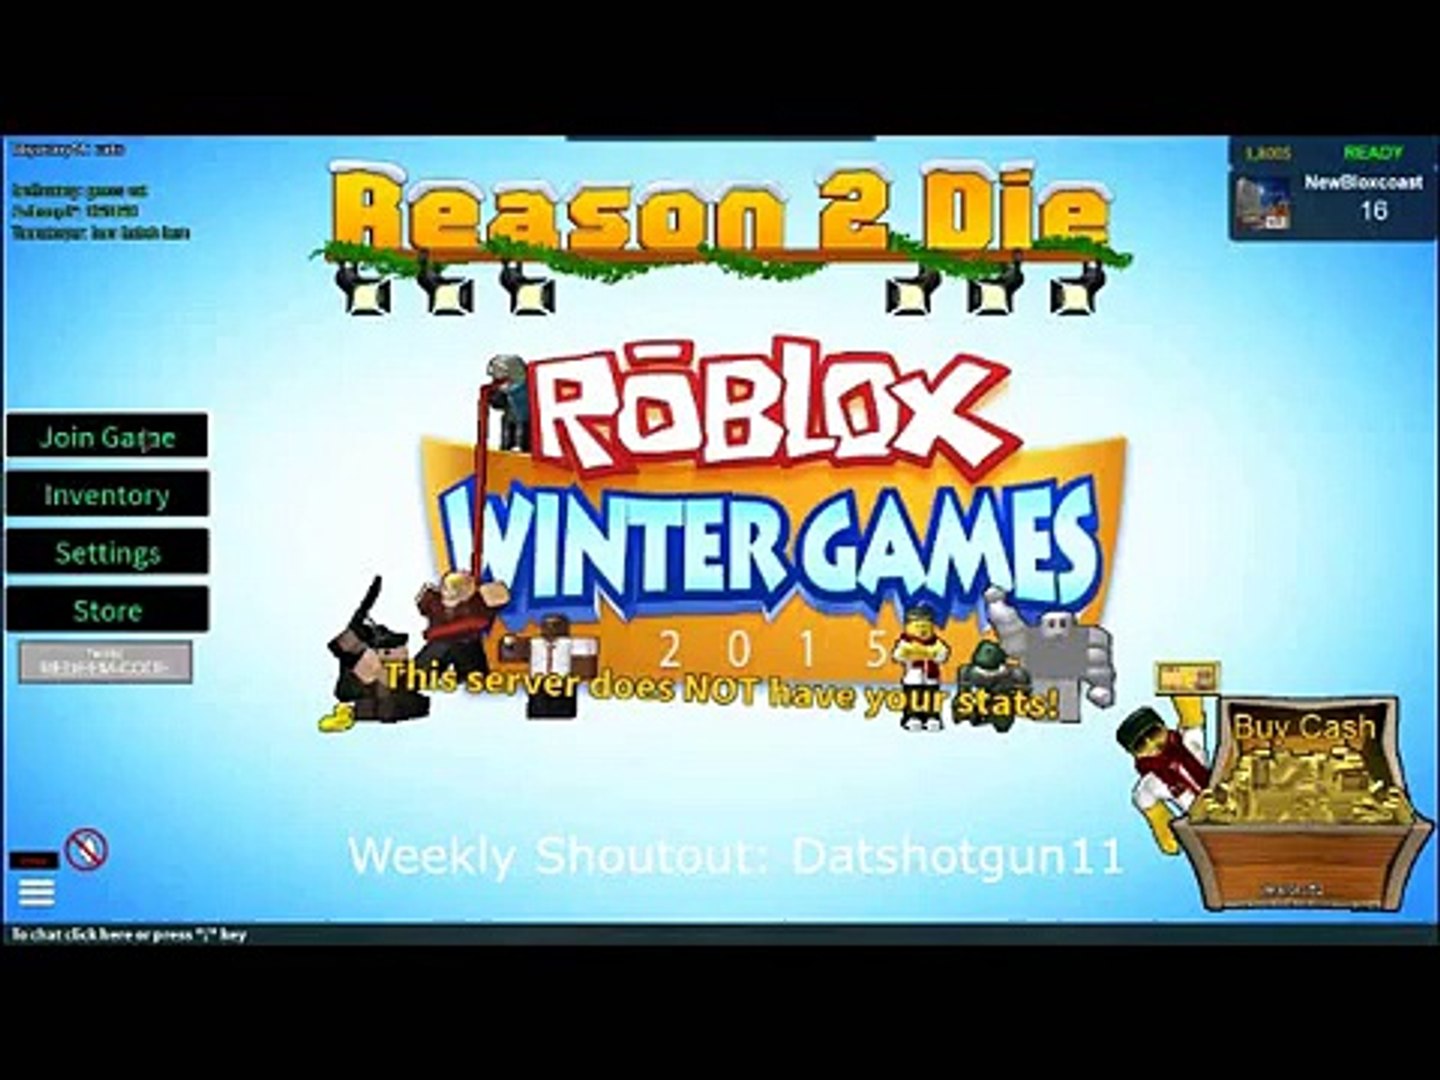 Roblox R2d How To Survive As Last Survivor Video Dailymotion - roblox r2d free redeem codes earbuds video dailymotion